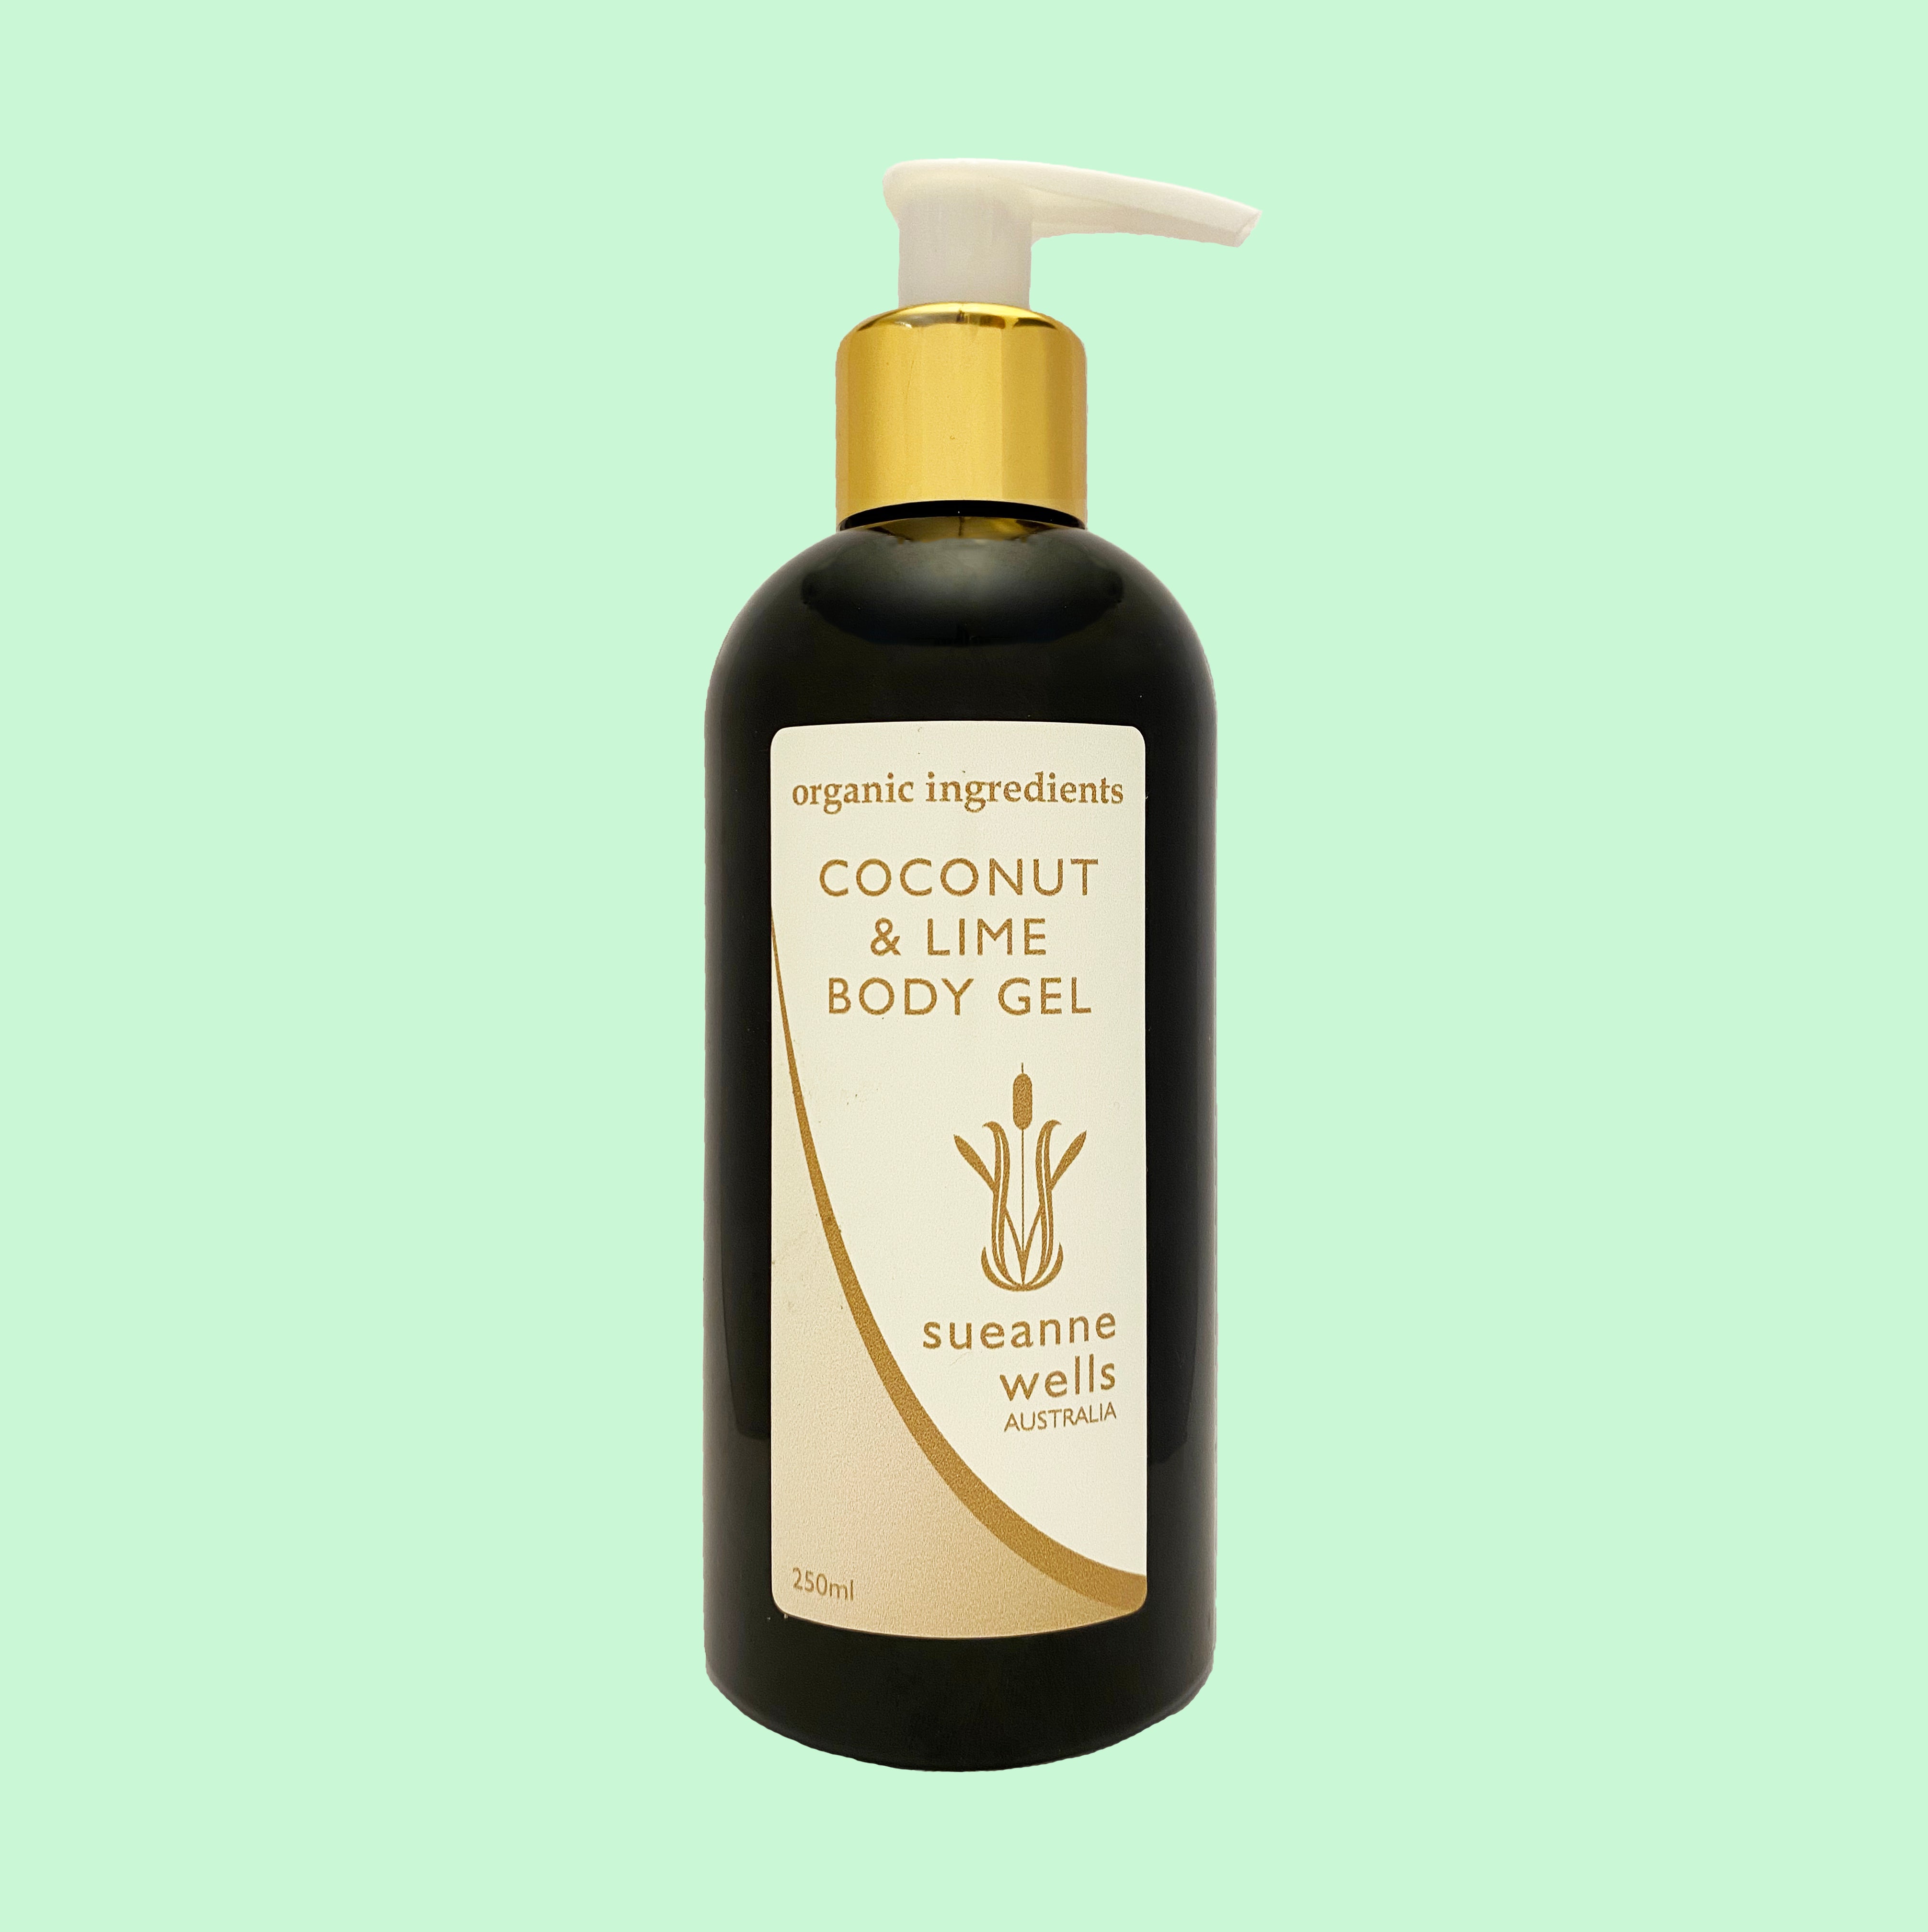 This completely natural body indulgence, saturates the entire body with long lasting moisture. Quickly absorbed, transforms skin's texture & tone revealing smoother, softer skin. Contains Aloe Vera Gelly, Rose Hip Oil, Rice Bran Oil, Vitamin E, Vegetable Glycerine, Plantaserv S, Carrot Seed Oil and a blend of Coconut & Lime to create a unique summer fragrance. Skin Care, Chemical And Preservative Free, Plant Based, Australian Made.